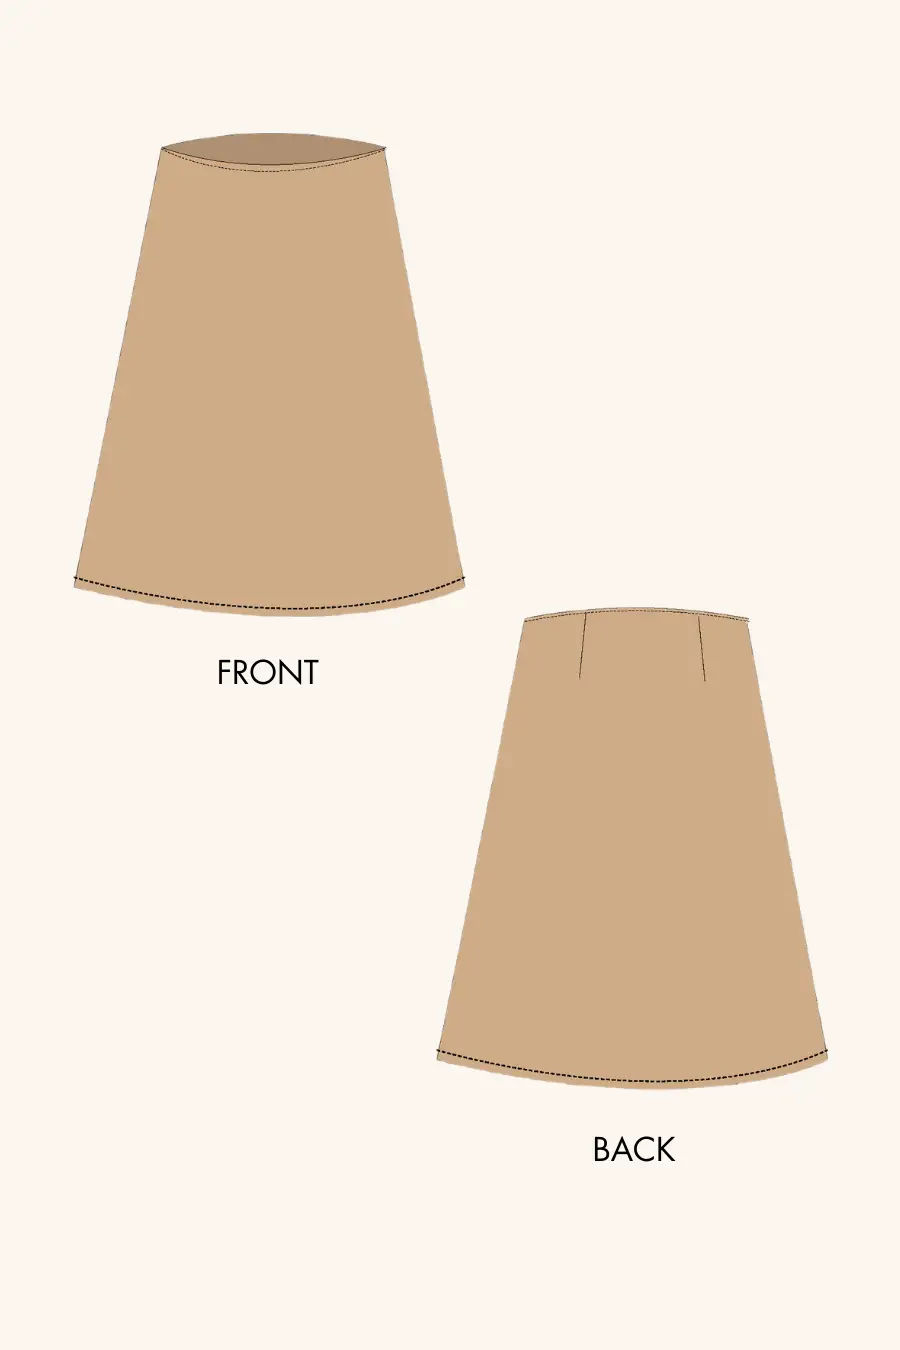 'Marigold' A line Skirt Sewing Pattern